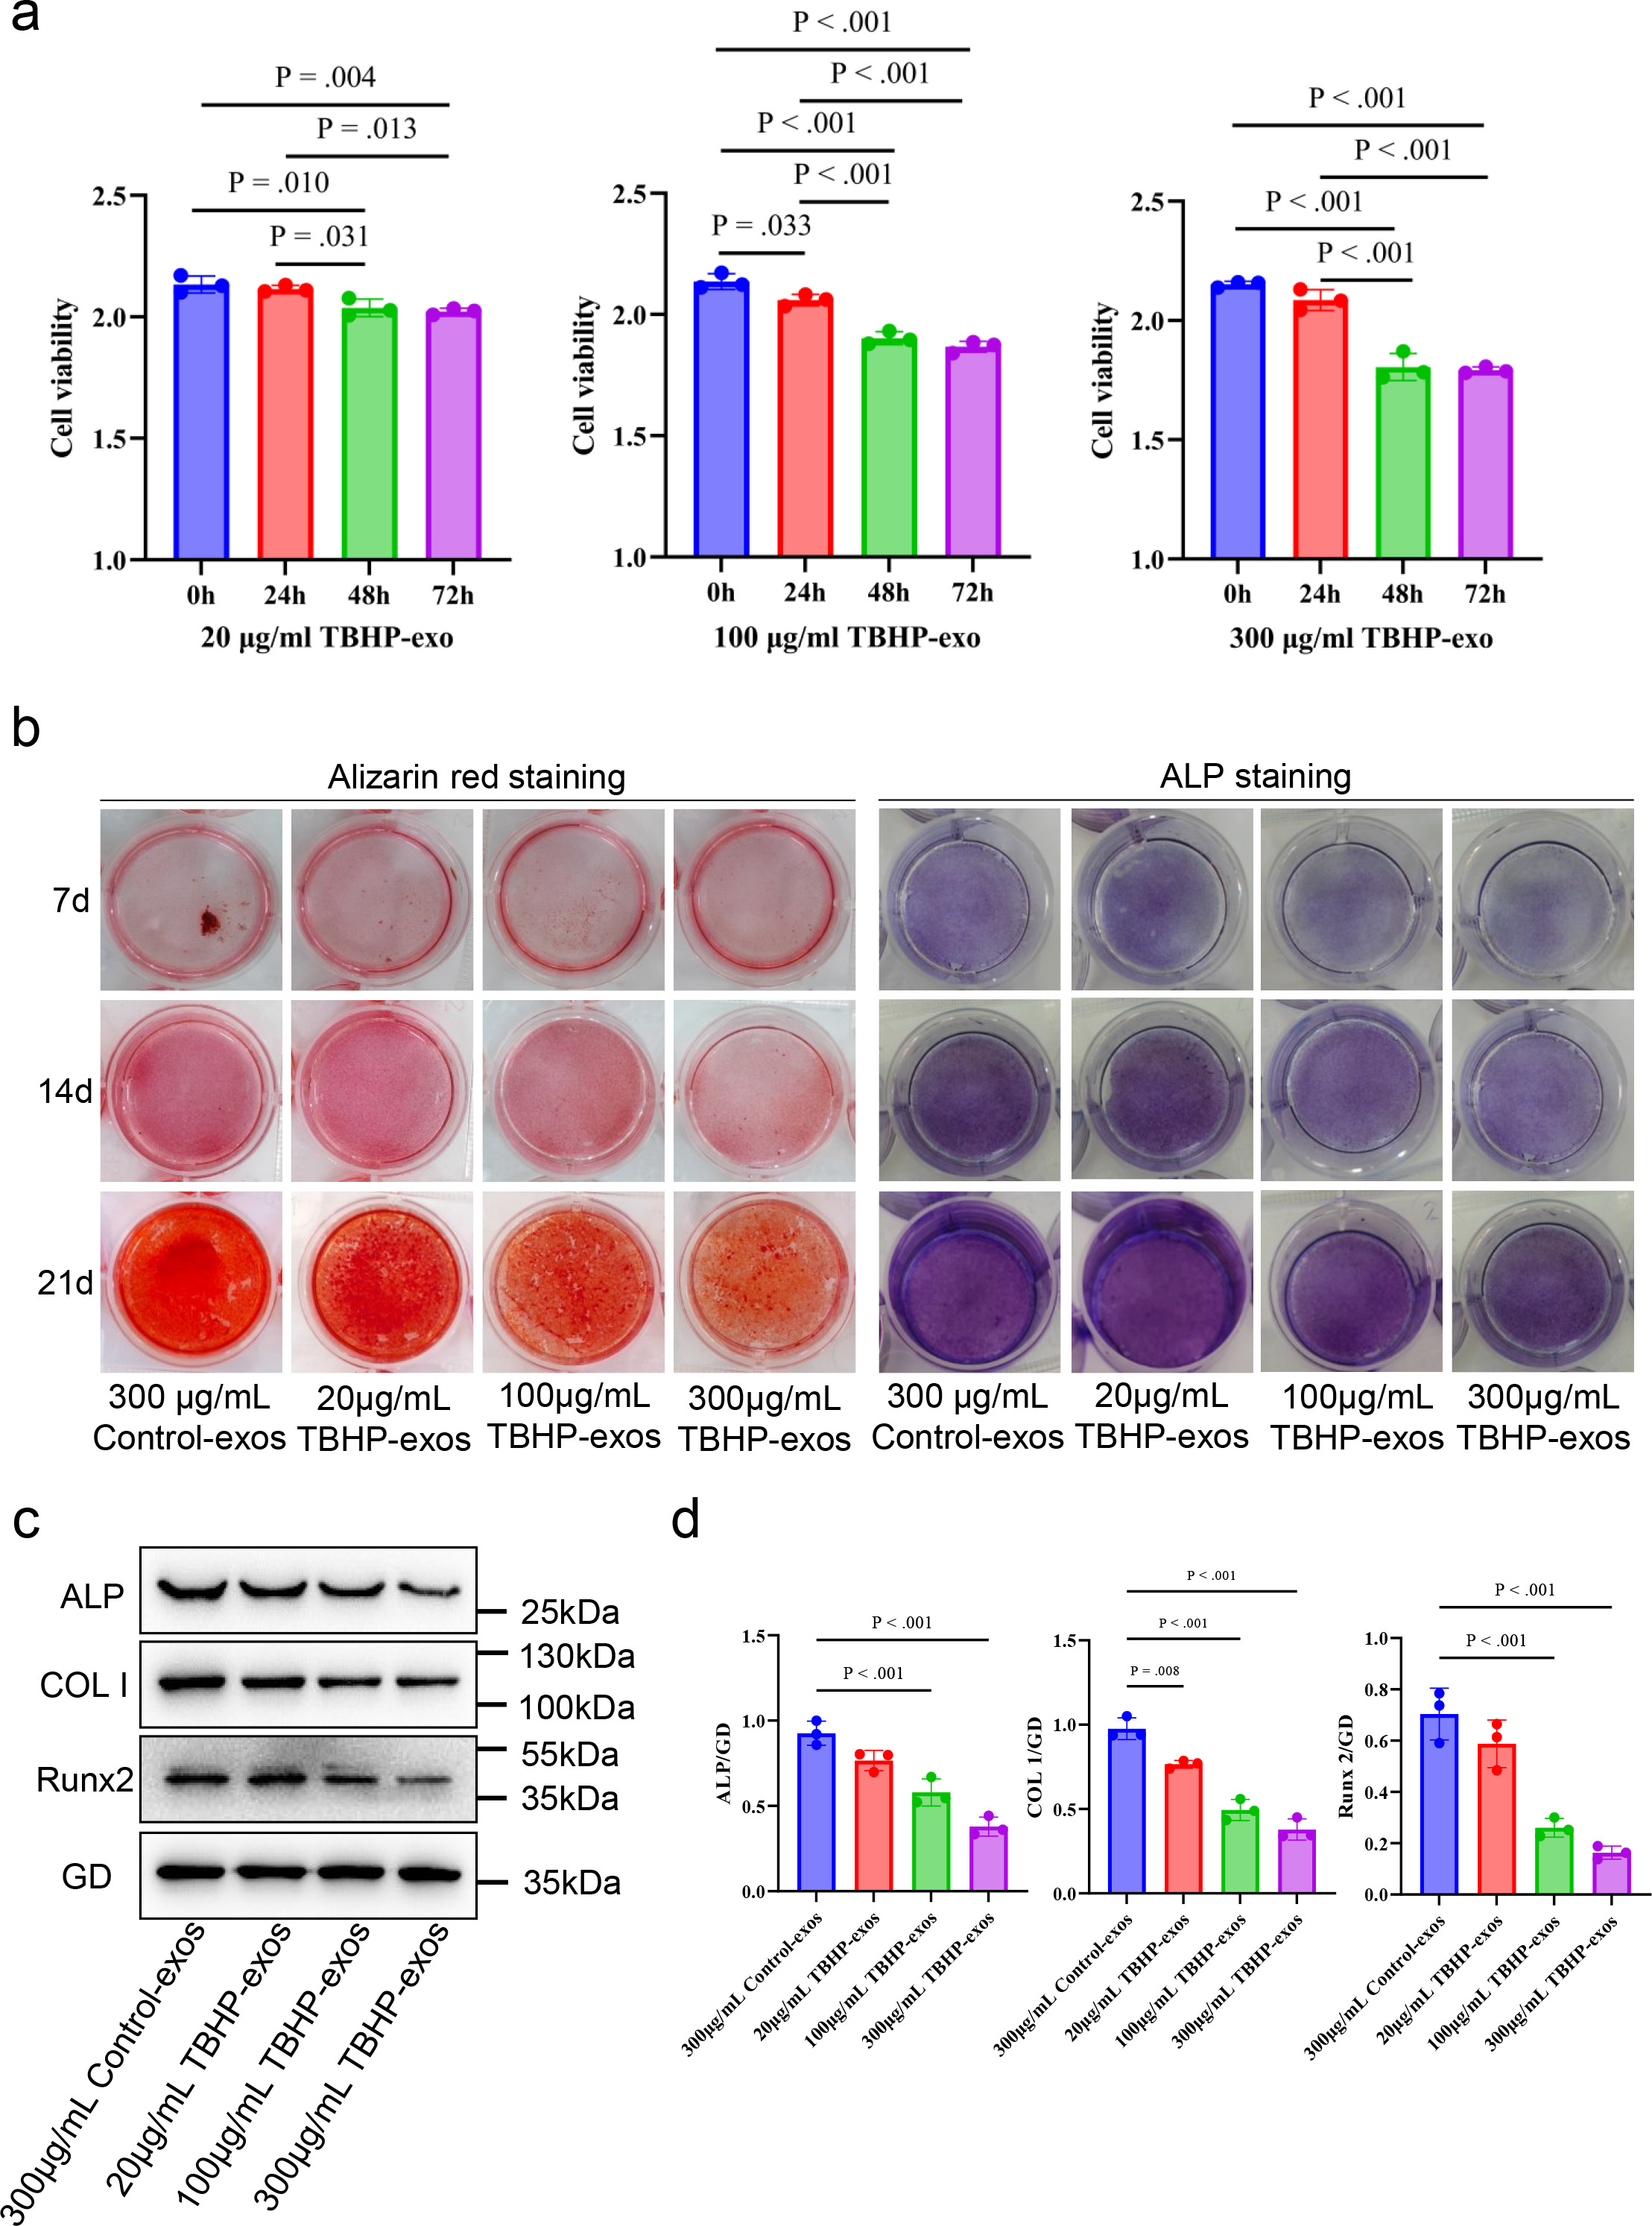 Fig. 2 
            Effects of senescent MLO-Y4 cell-derived exosomes (abbreviated tert-Butyl hydroperoxide (TBHP)-exos in the figure) on osteogenic differentiation of MC3T3-E1 cells. a) Cell Counting Kit 8 (CCK-8) assay of MC3T3-E1 cells treated with different concentrations (20, 100, or 300 μg/ml) of senescent MLO-Y4 cell-derived exosomes for different lengths of time (0, 24, 48, or 72 hours). b) Alkaline phosphatase (ALP) and Alizarin Red S staining of MC3T3-E1 cells on days 7, 14, and 21 after treatment with the indicated concentrations of exosomes obtained from senescent MLO-Y4 cells. c) and d) Western blotting and grayscale analysis of ALP, Runt-related transcription factor 2 (Runx2), and collagen type I α1 (Col-I) expression in MC3T3-E1 cells in different treatment groups. Data are shown as column charts and the p-values were calculated by one-way analysis of variance with Sidak’s multiple comparison tests. The p-values were specified only when p < 0.05 (statistically significant). GD, glyceraldehyde 3-phosphate dehydrogenase.
          